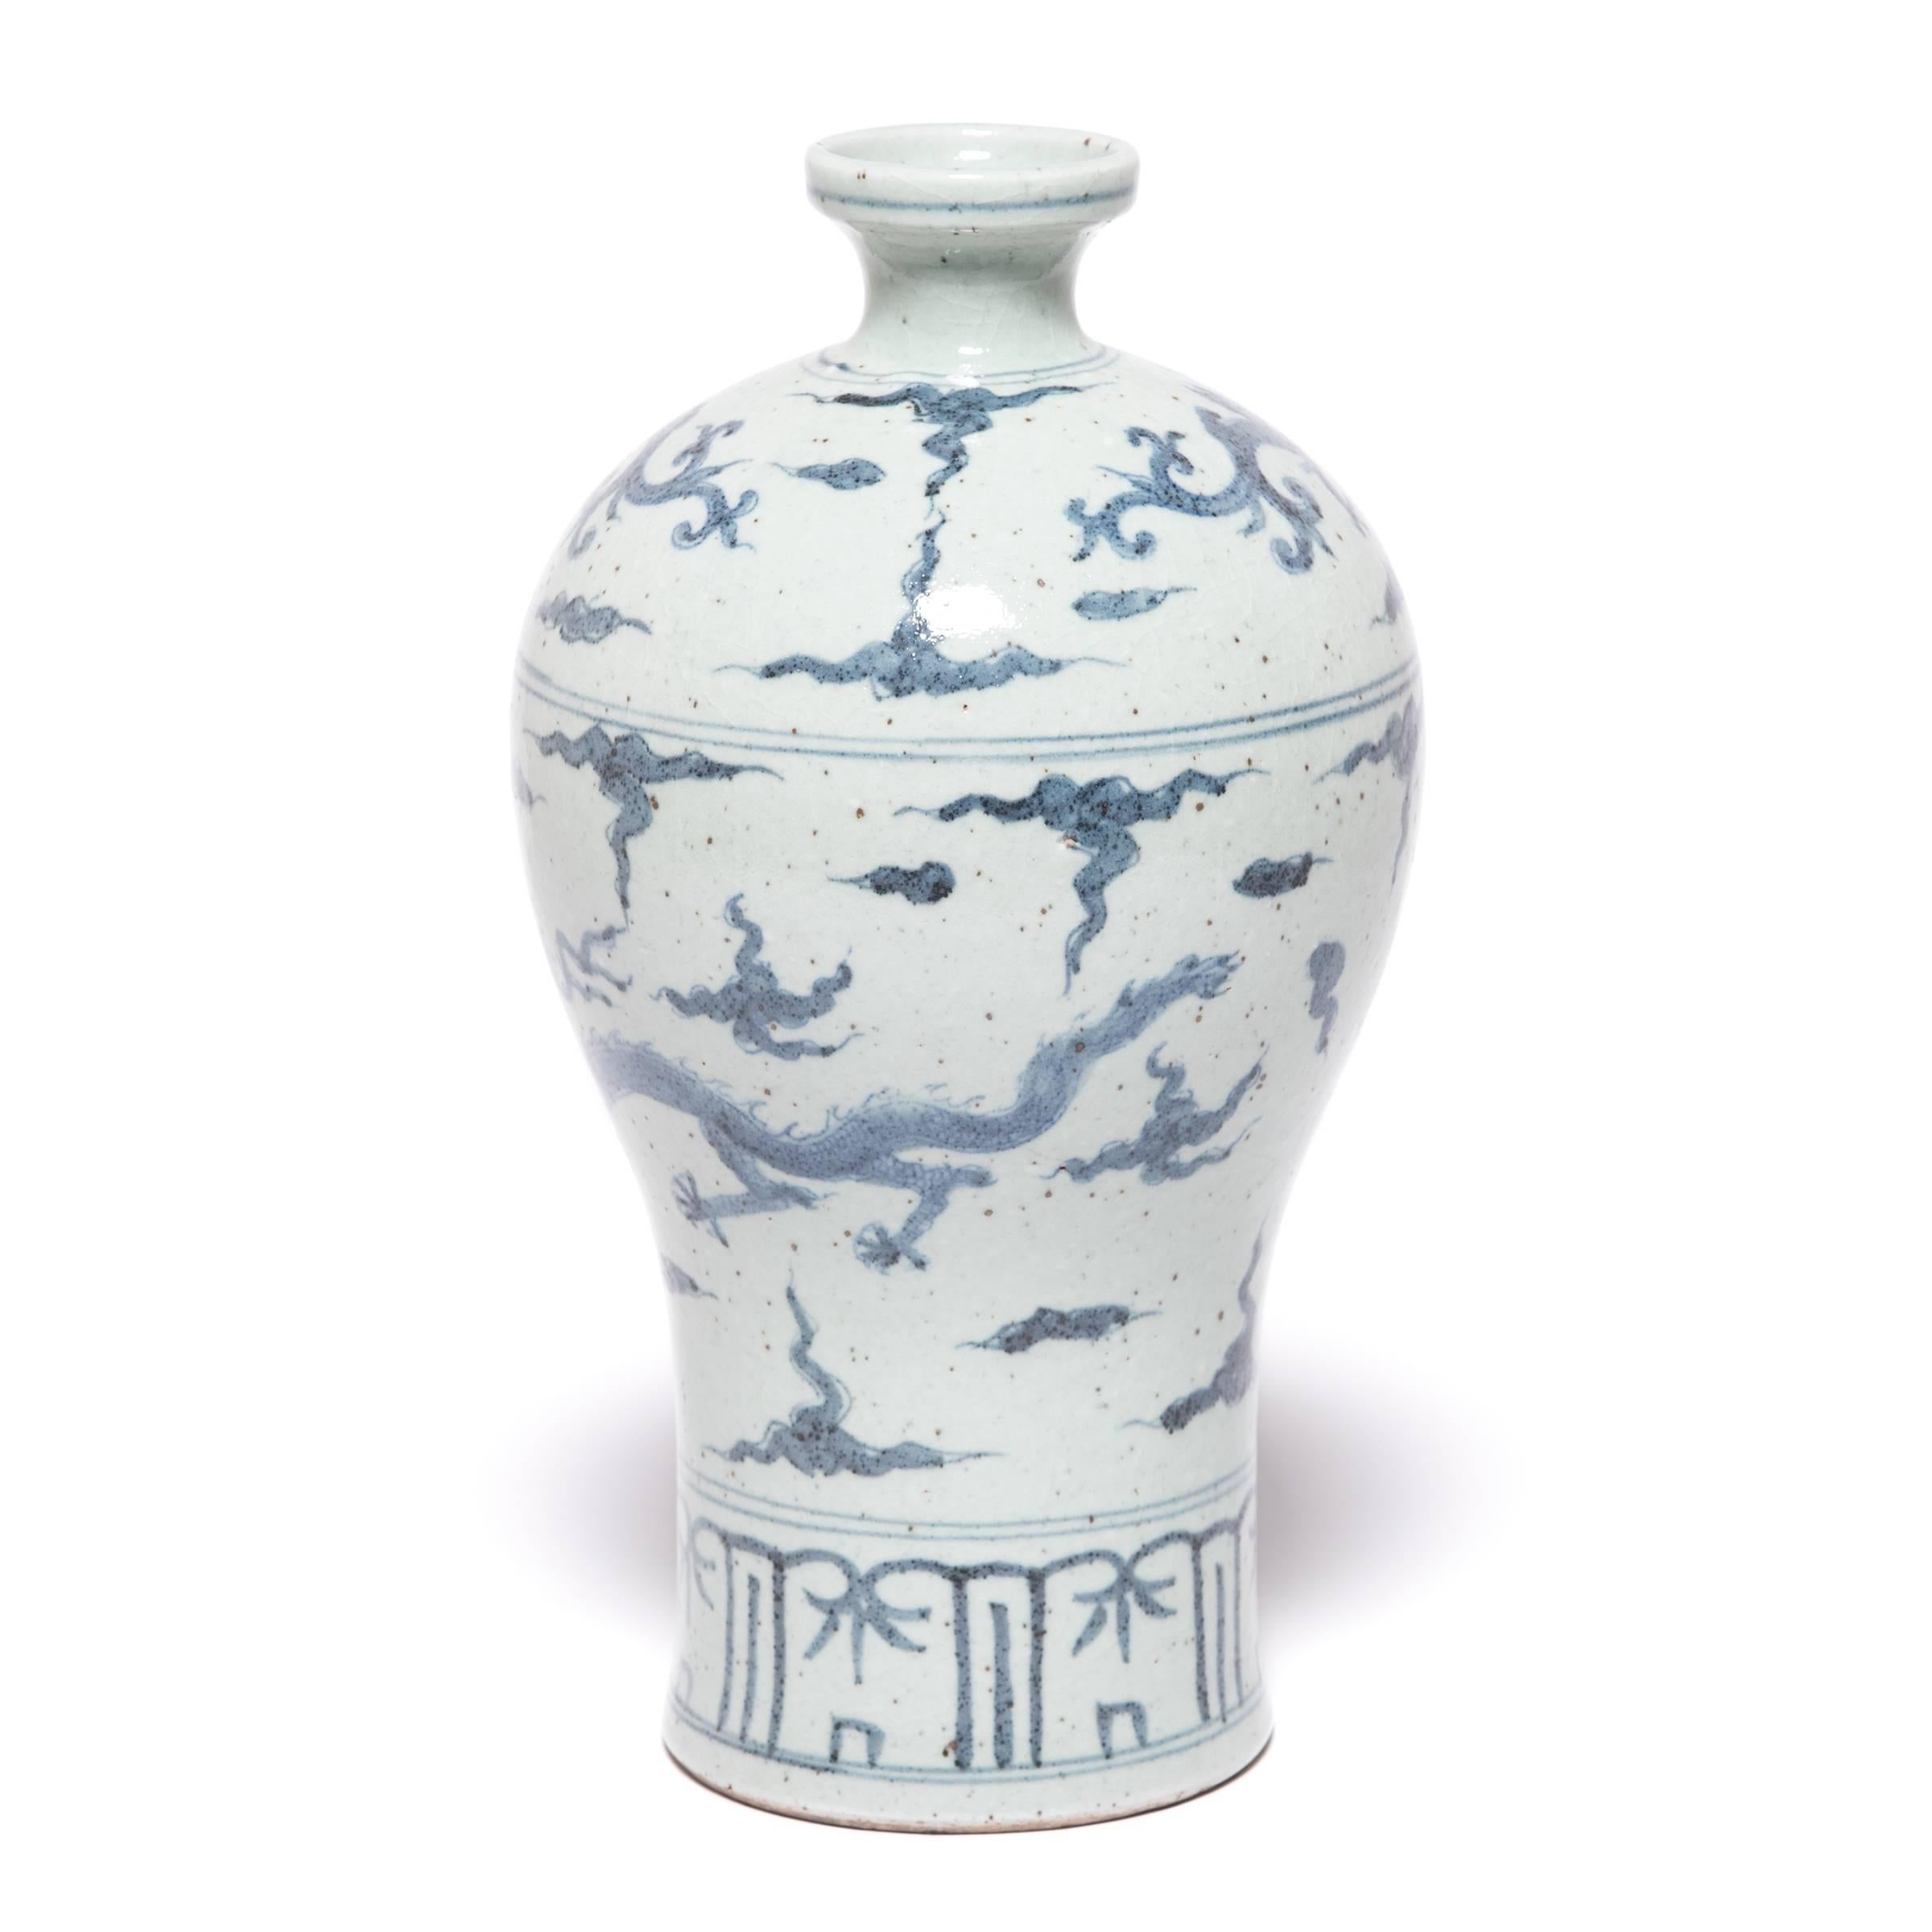 Chinese blue-and-white porcelain has inspired ceramists worldwide since cobalt was first introduced to China from the Middle East thousands of years ago. Made in Beijing, this contemporary version of a classic vase showcases traditional